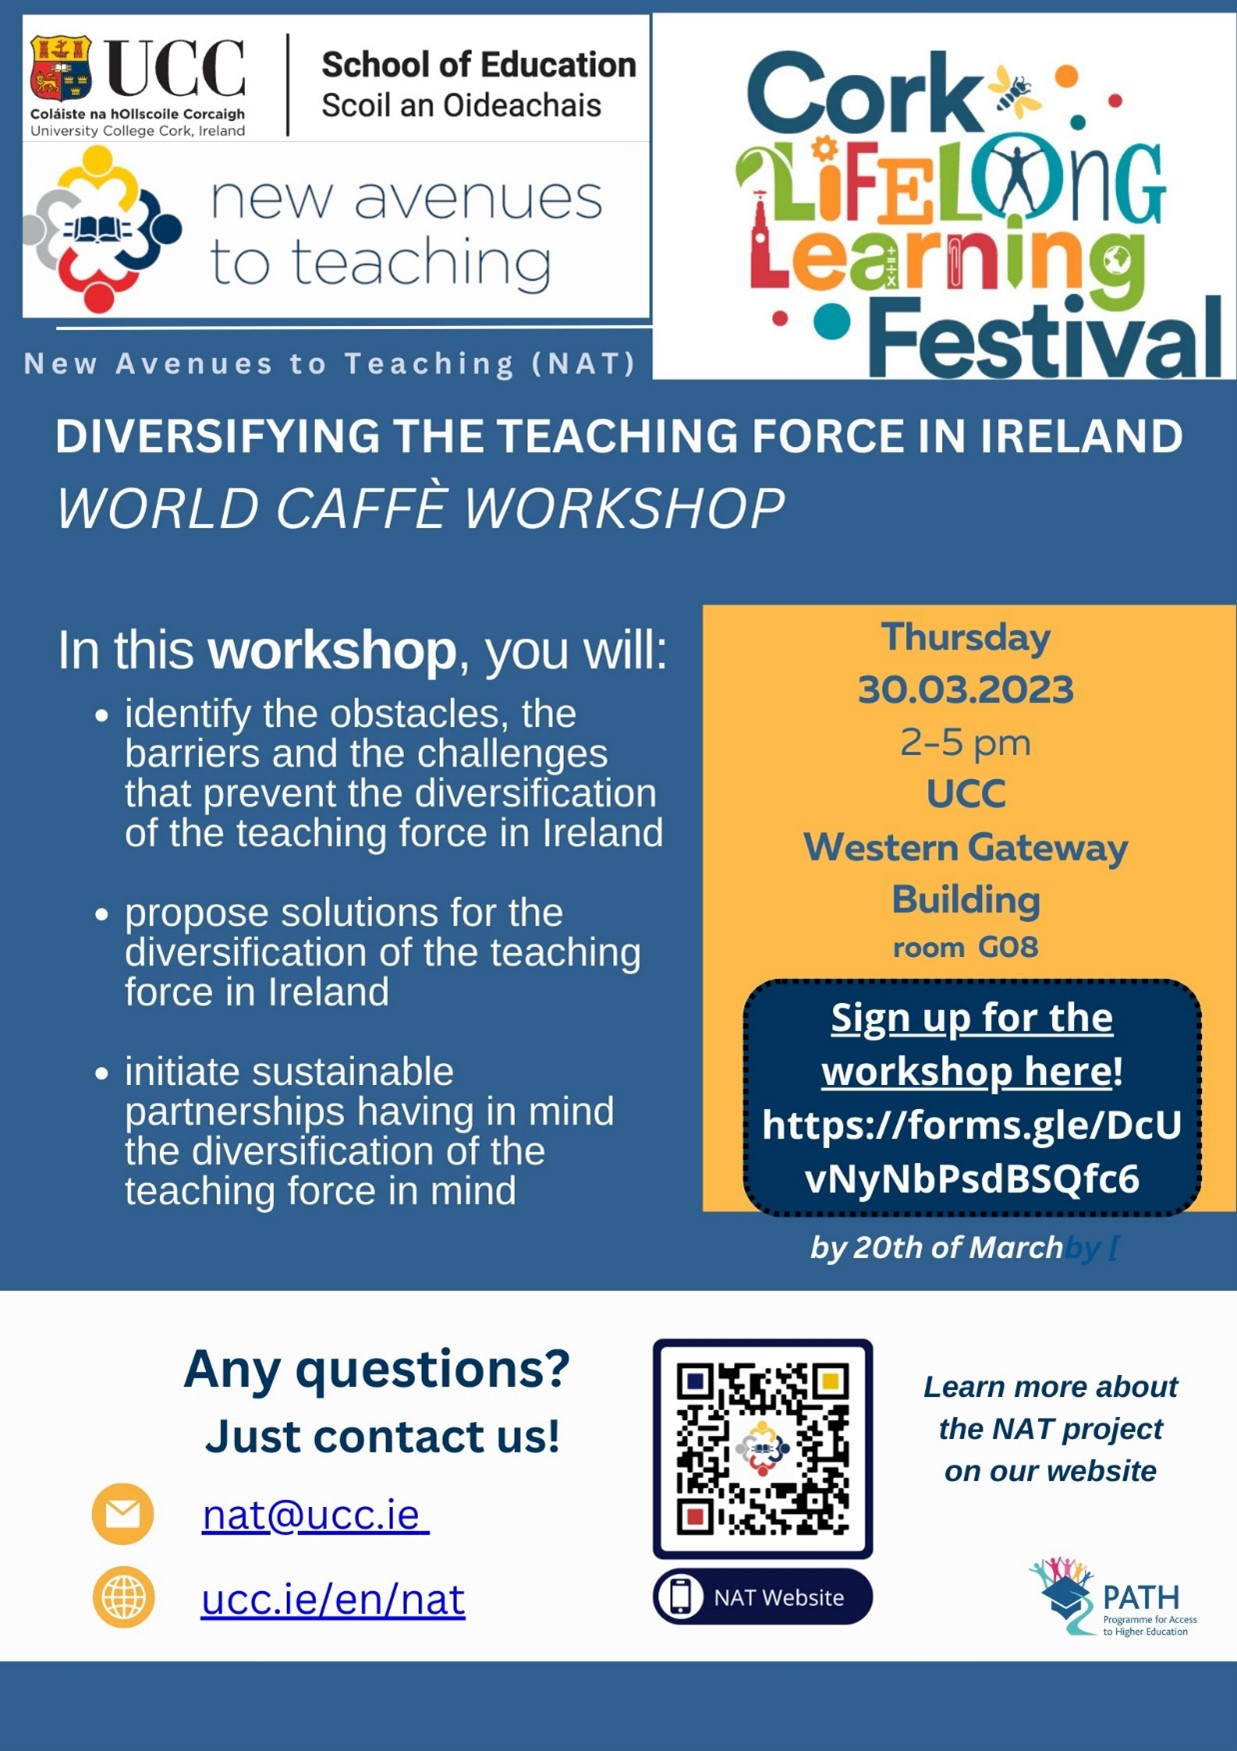 New Avenues to Teaching World Caffe Workshop: Diversifying the teaching force in Ireland